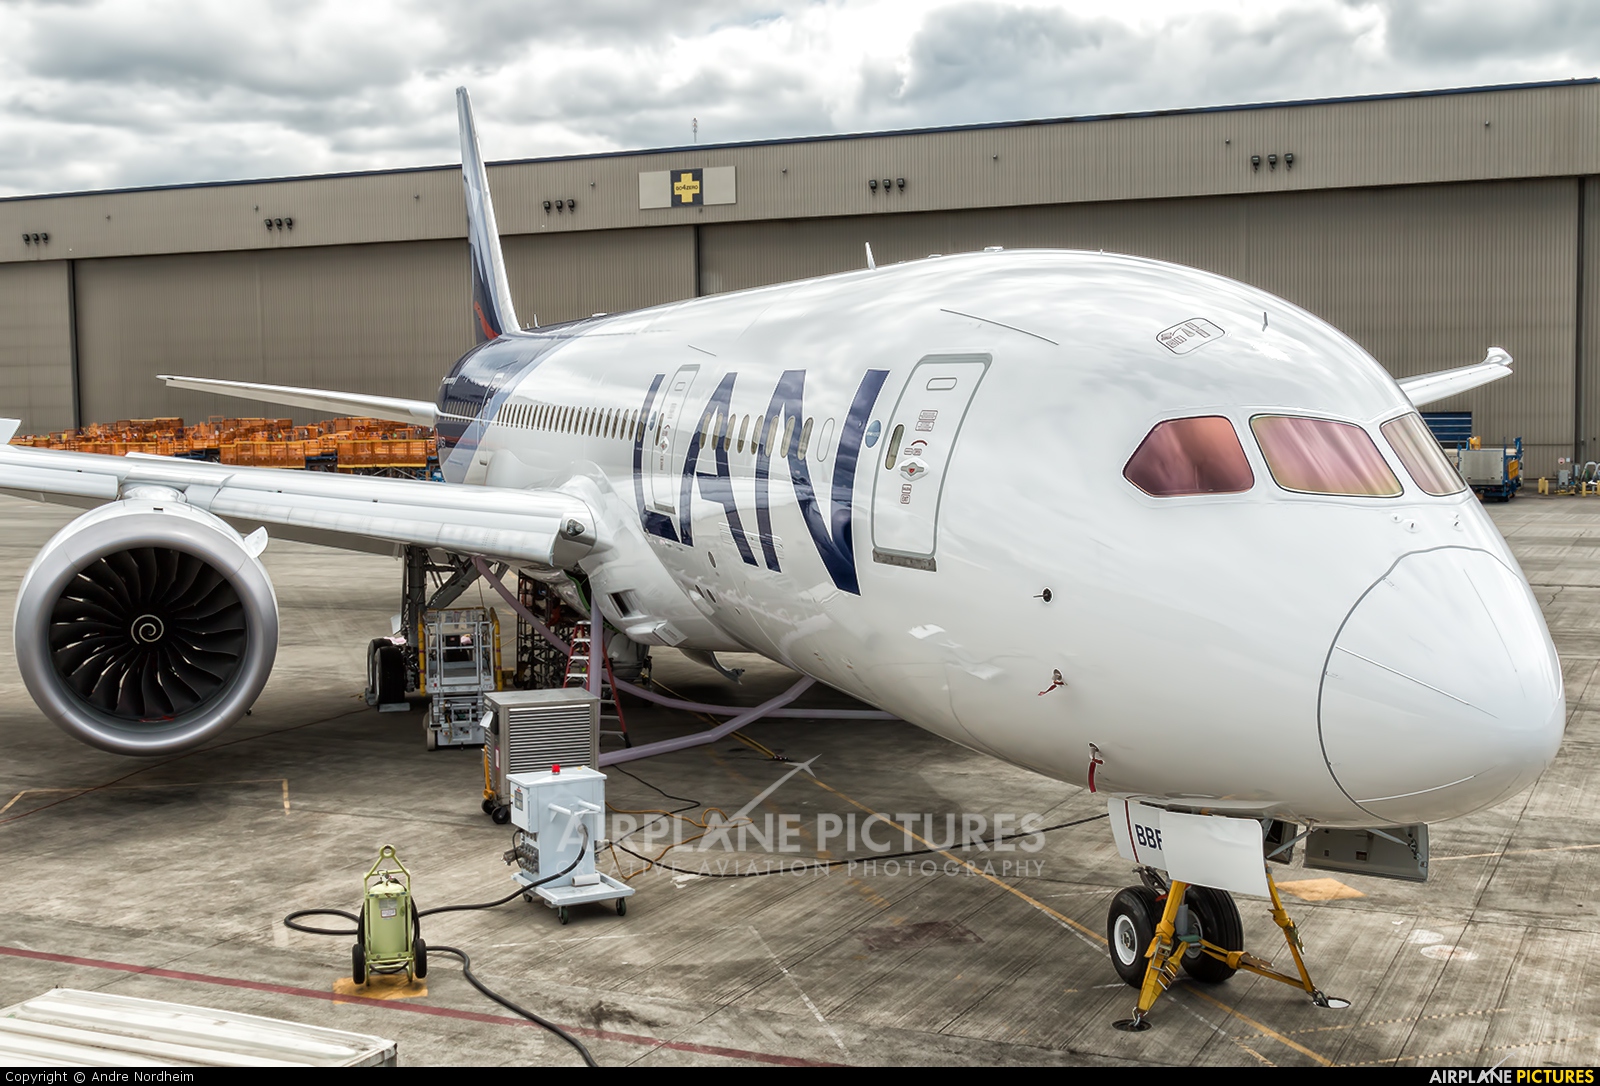 LAN Airlines CC-BBF aircraft at Everett - Snohomish County / Paine Field